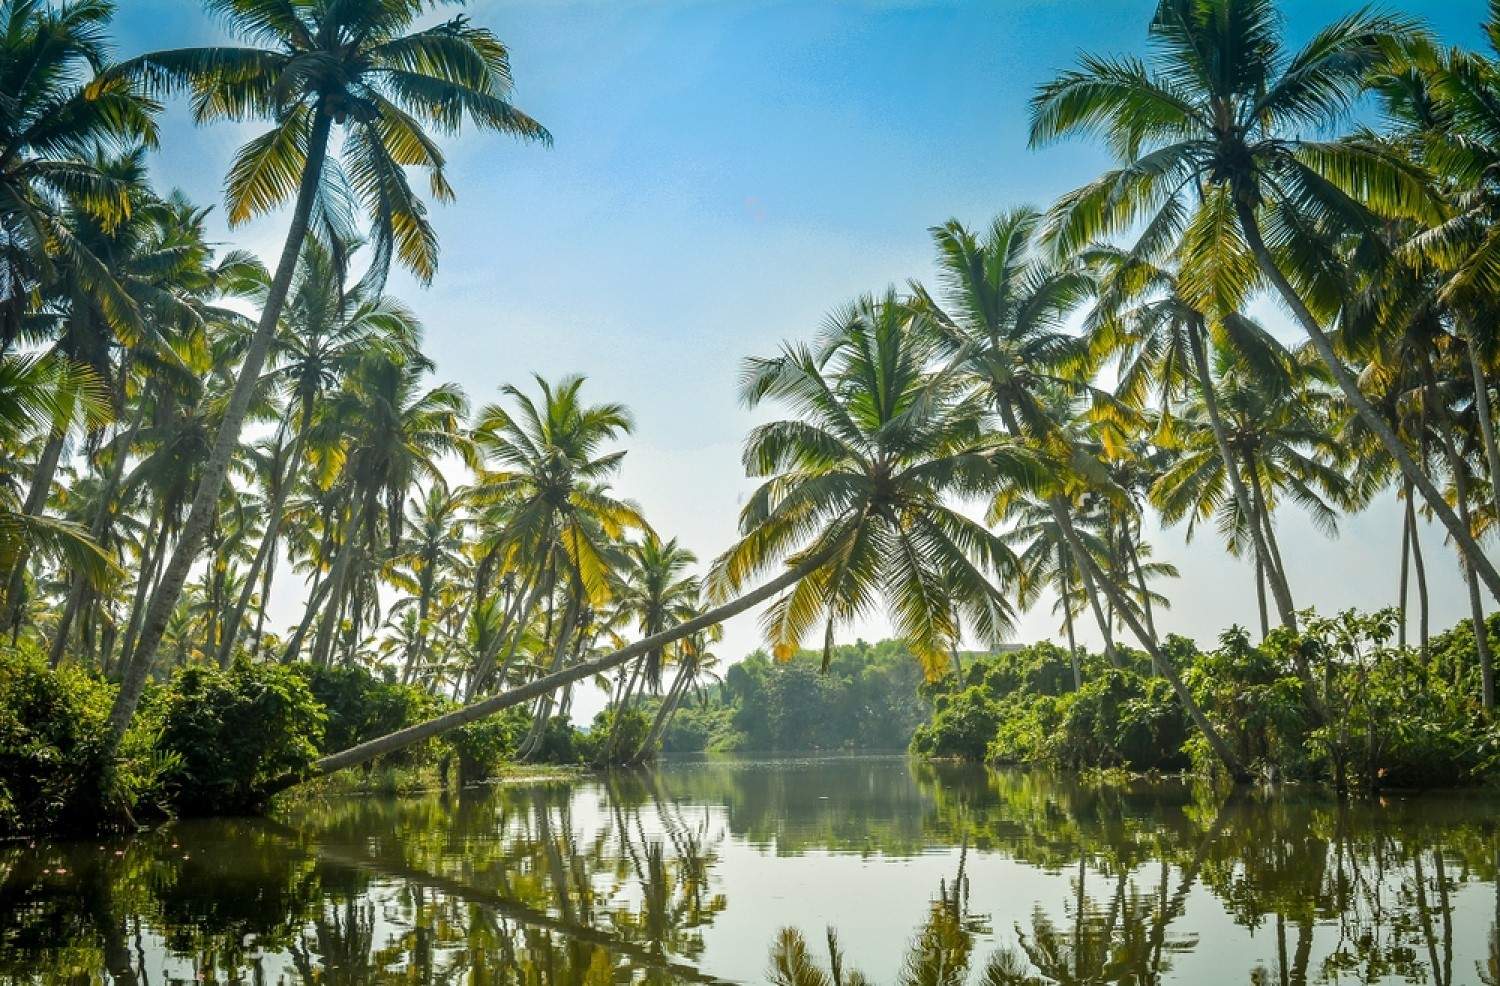 A view from a boat ride to Poovar Island, with lush greenery and calm waters of the backwaters in the background.